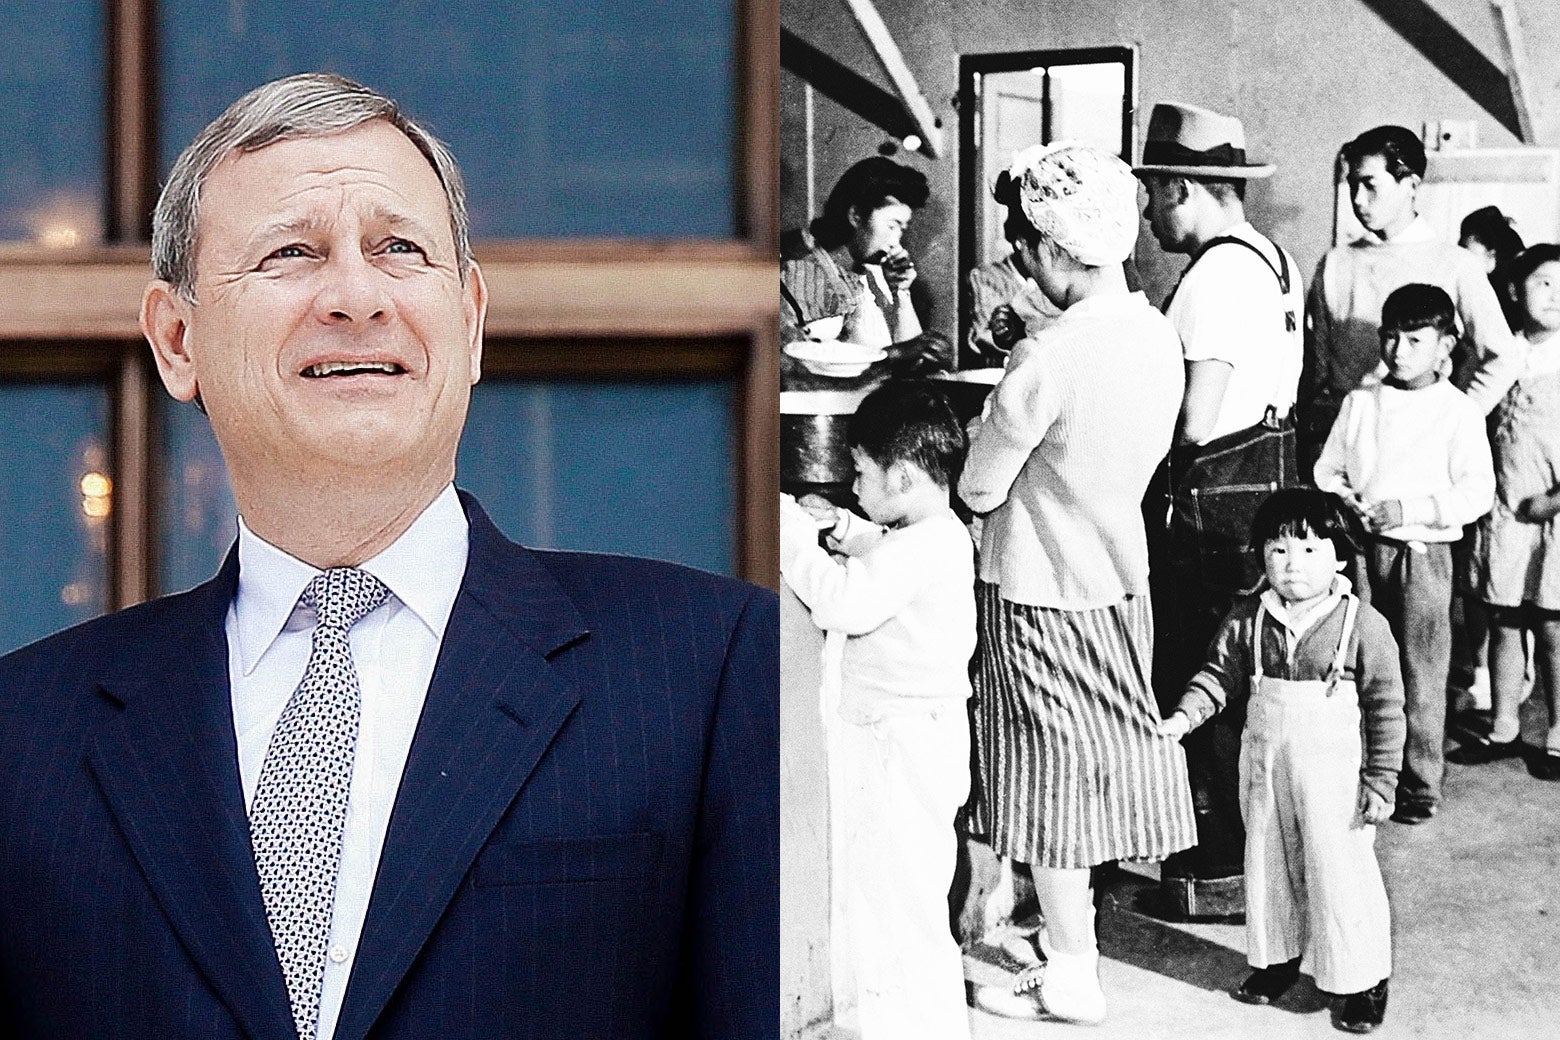 Chief Justice John Roberts, an internment camp for Japanese Americans from California.